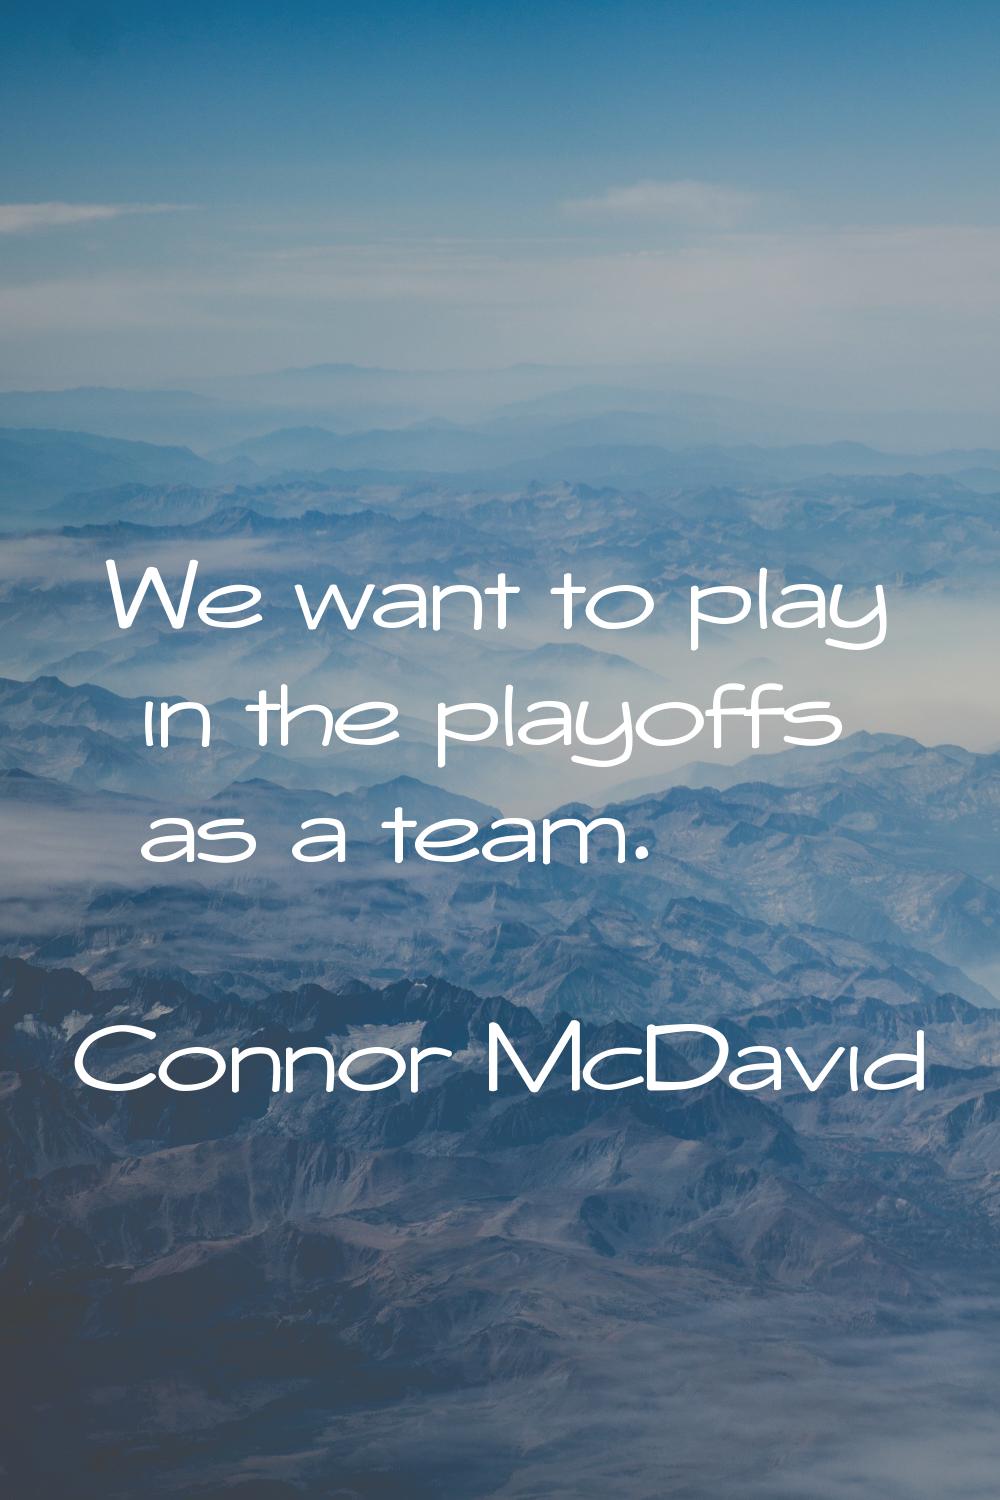 We want to play in the playoffs as a team.